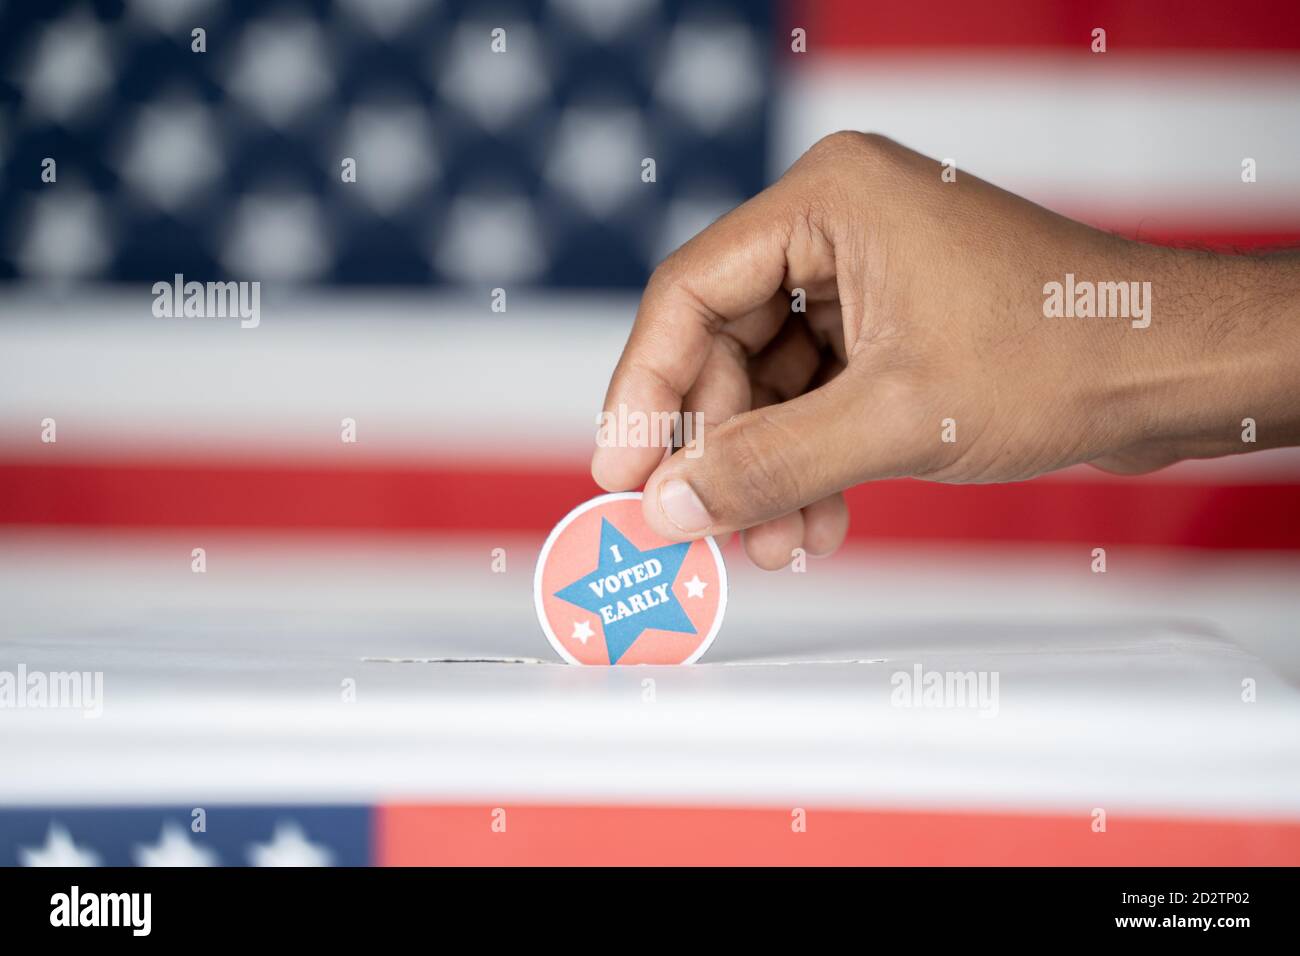 Close up of Hands placing I voted Early sticker inside the ballot box - Concept of Early voting in us election. Stock Photo